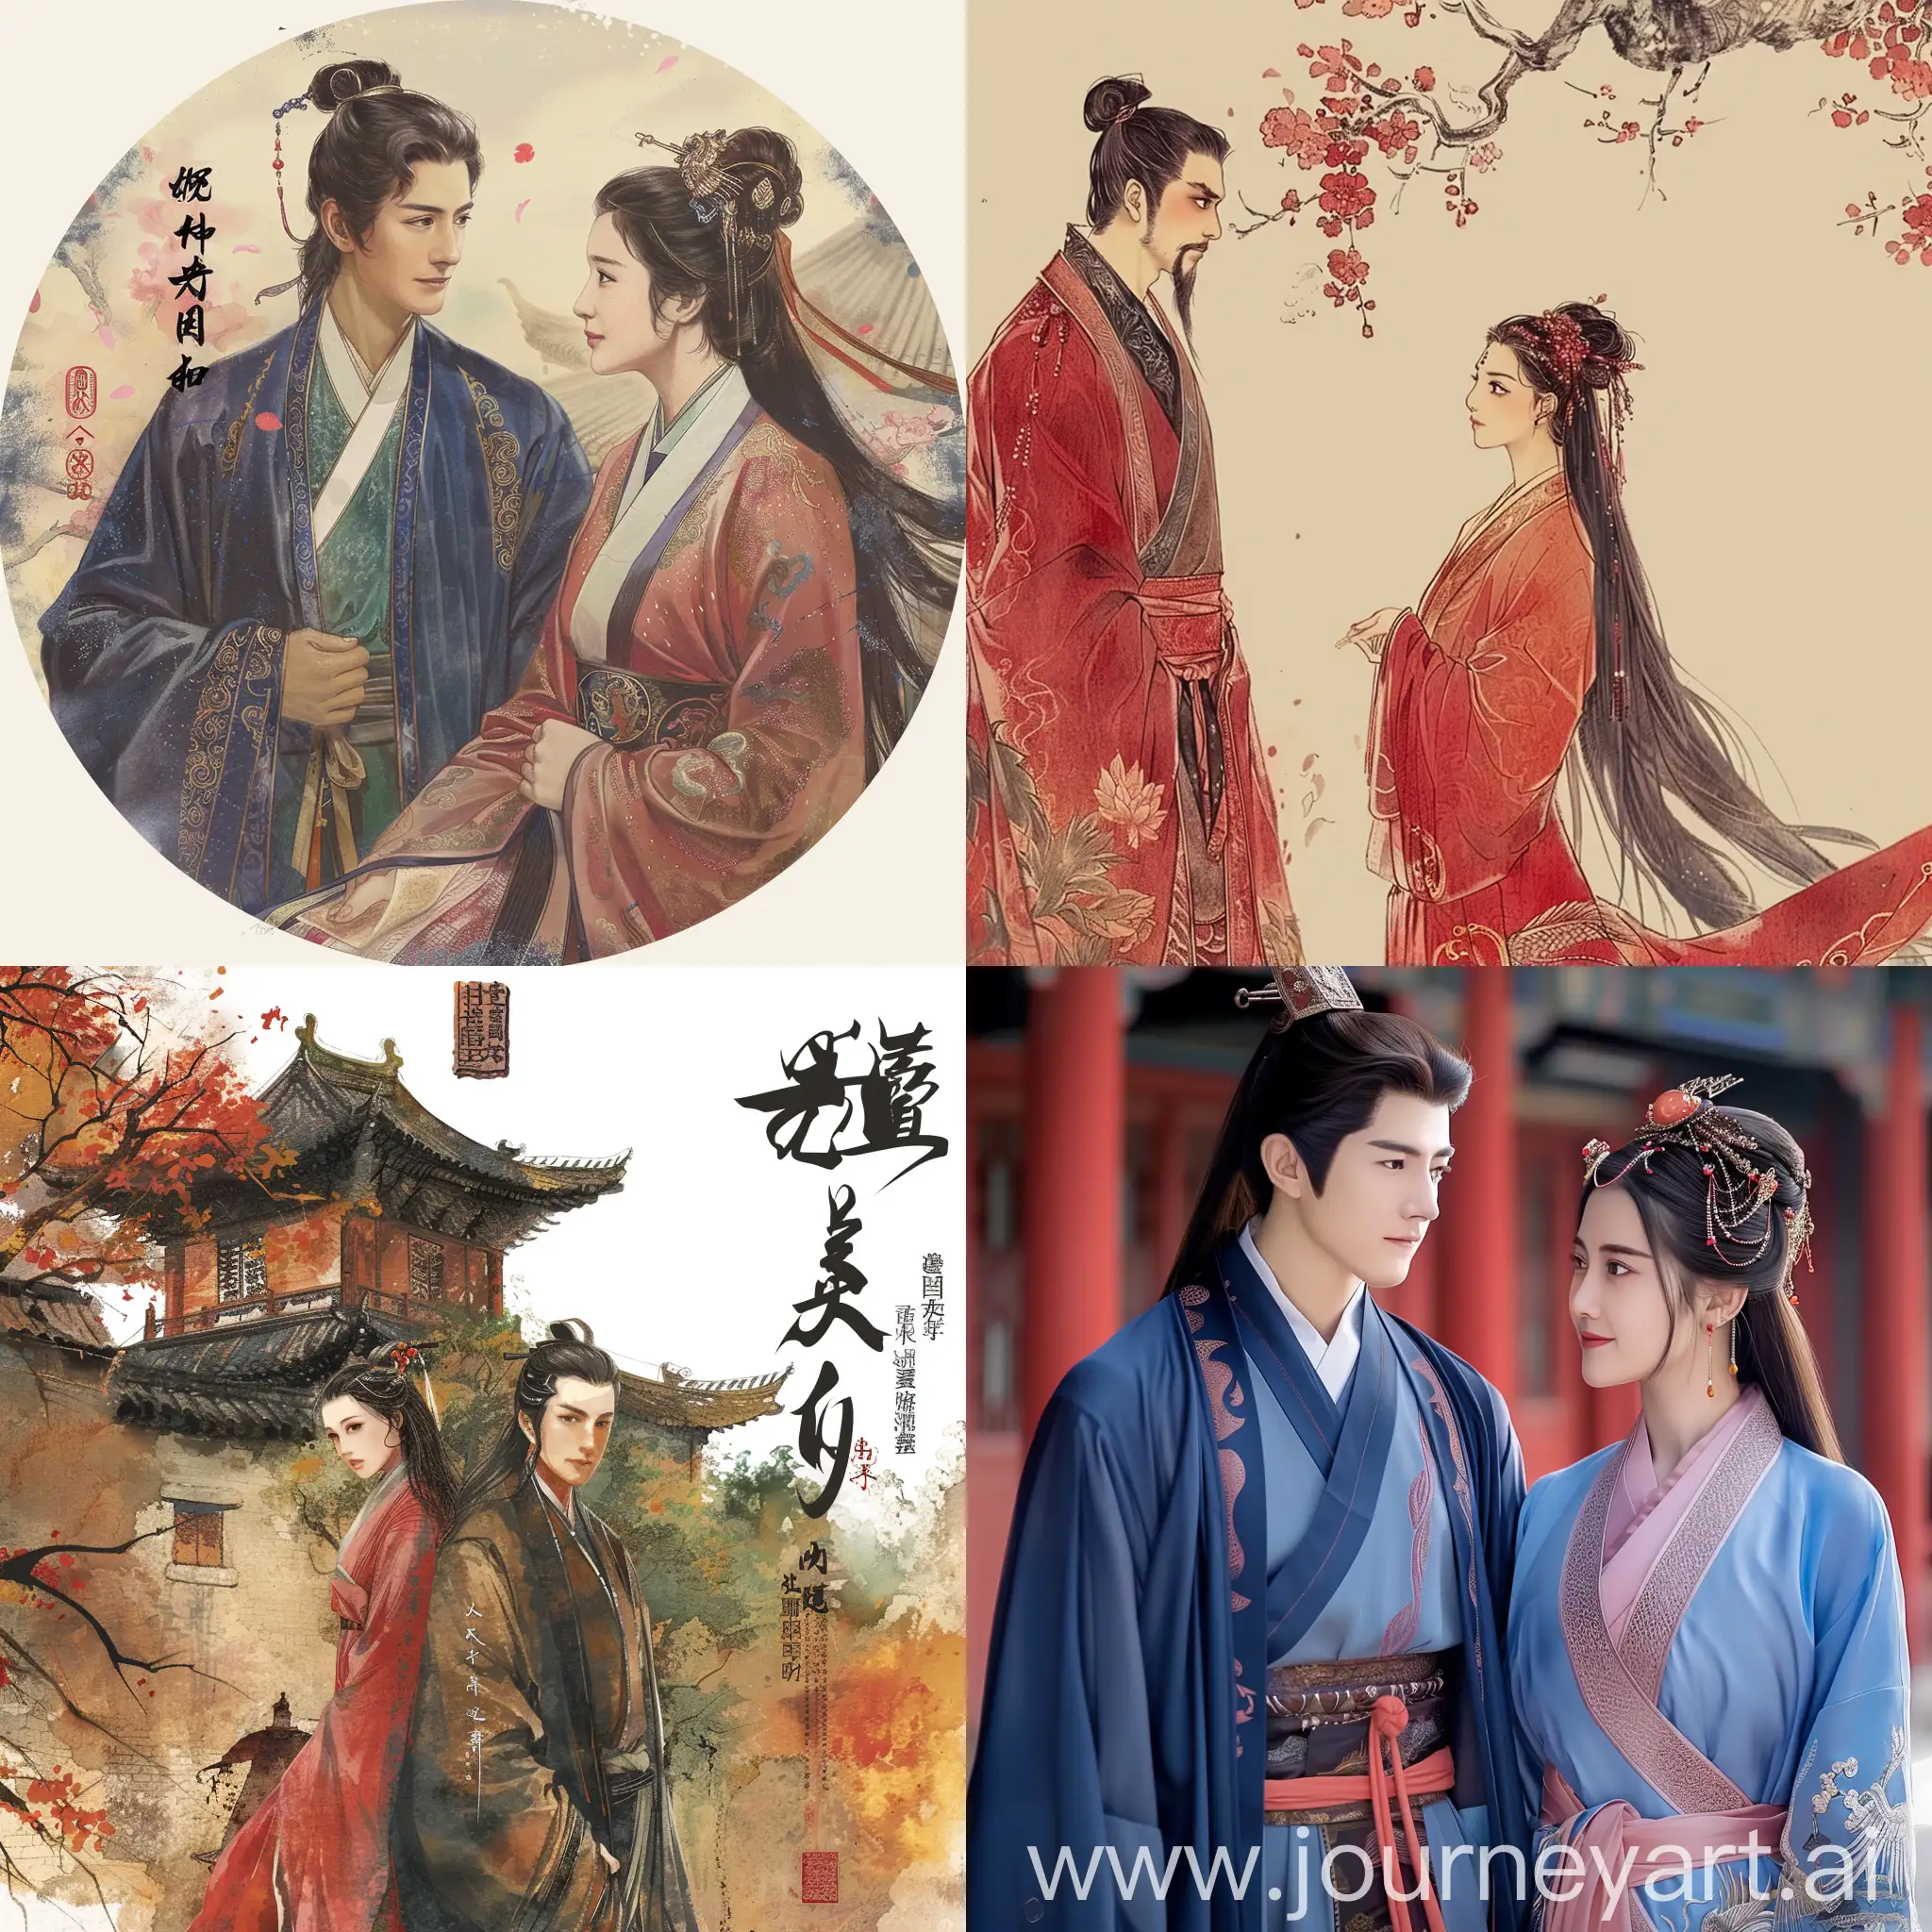 Scholarly-Romance-Zhang-Shengs-Encounter-with-Cui-Yingying-at-Pujue-Temple